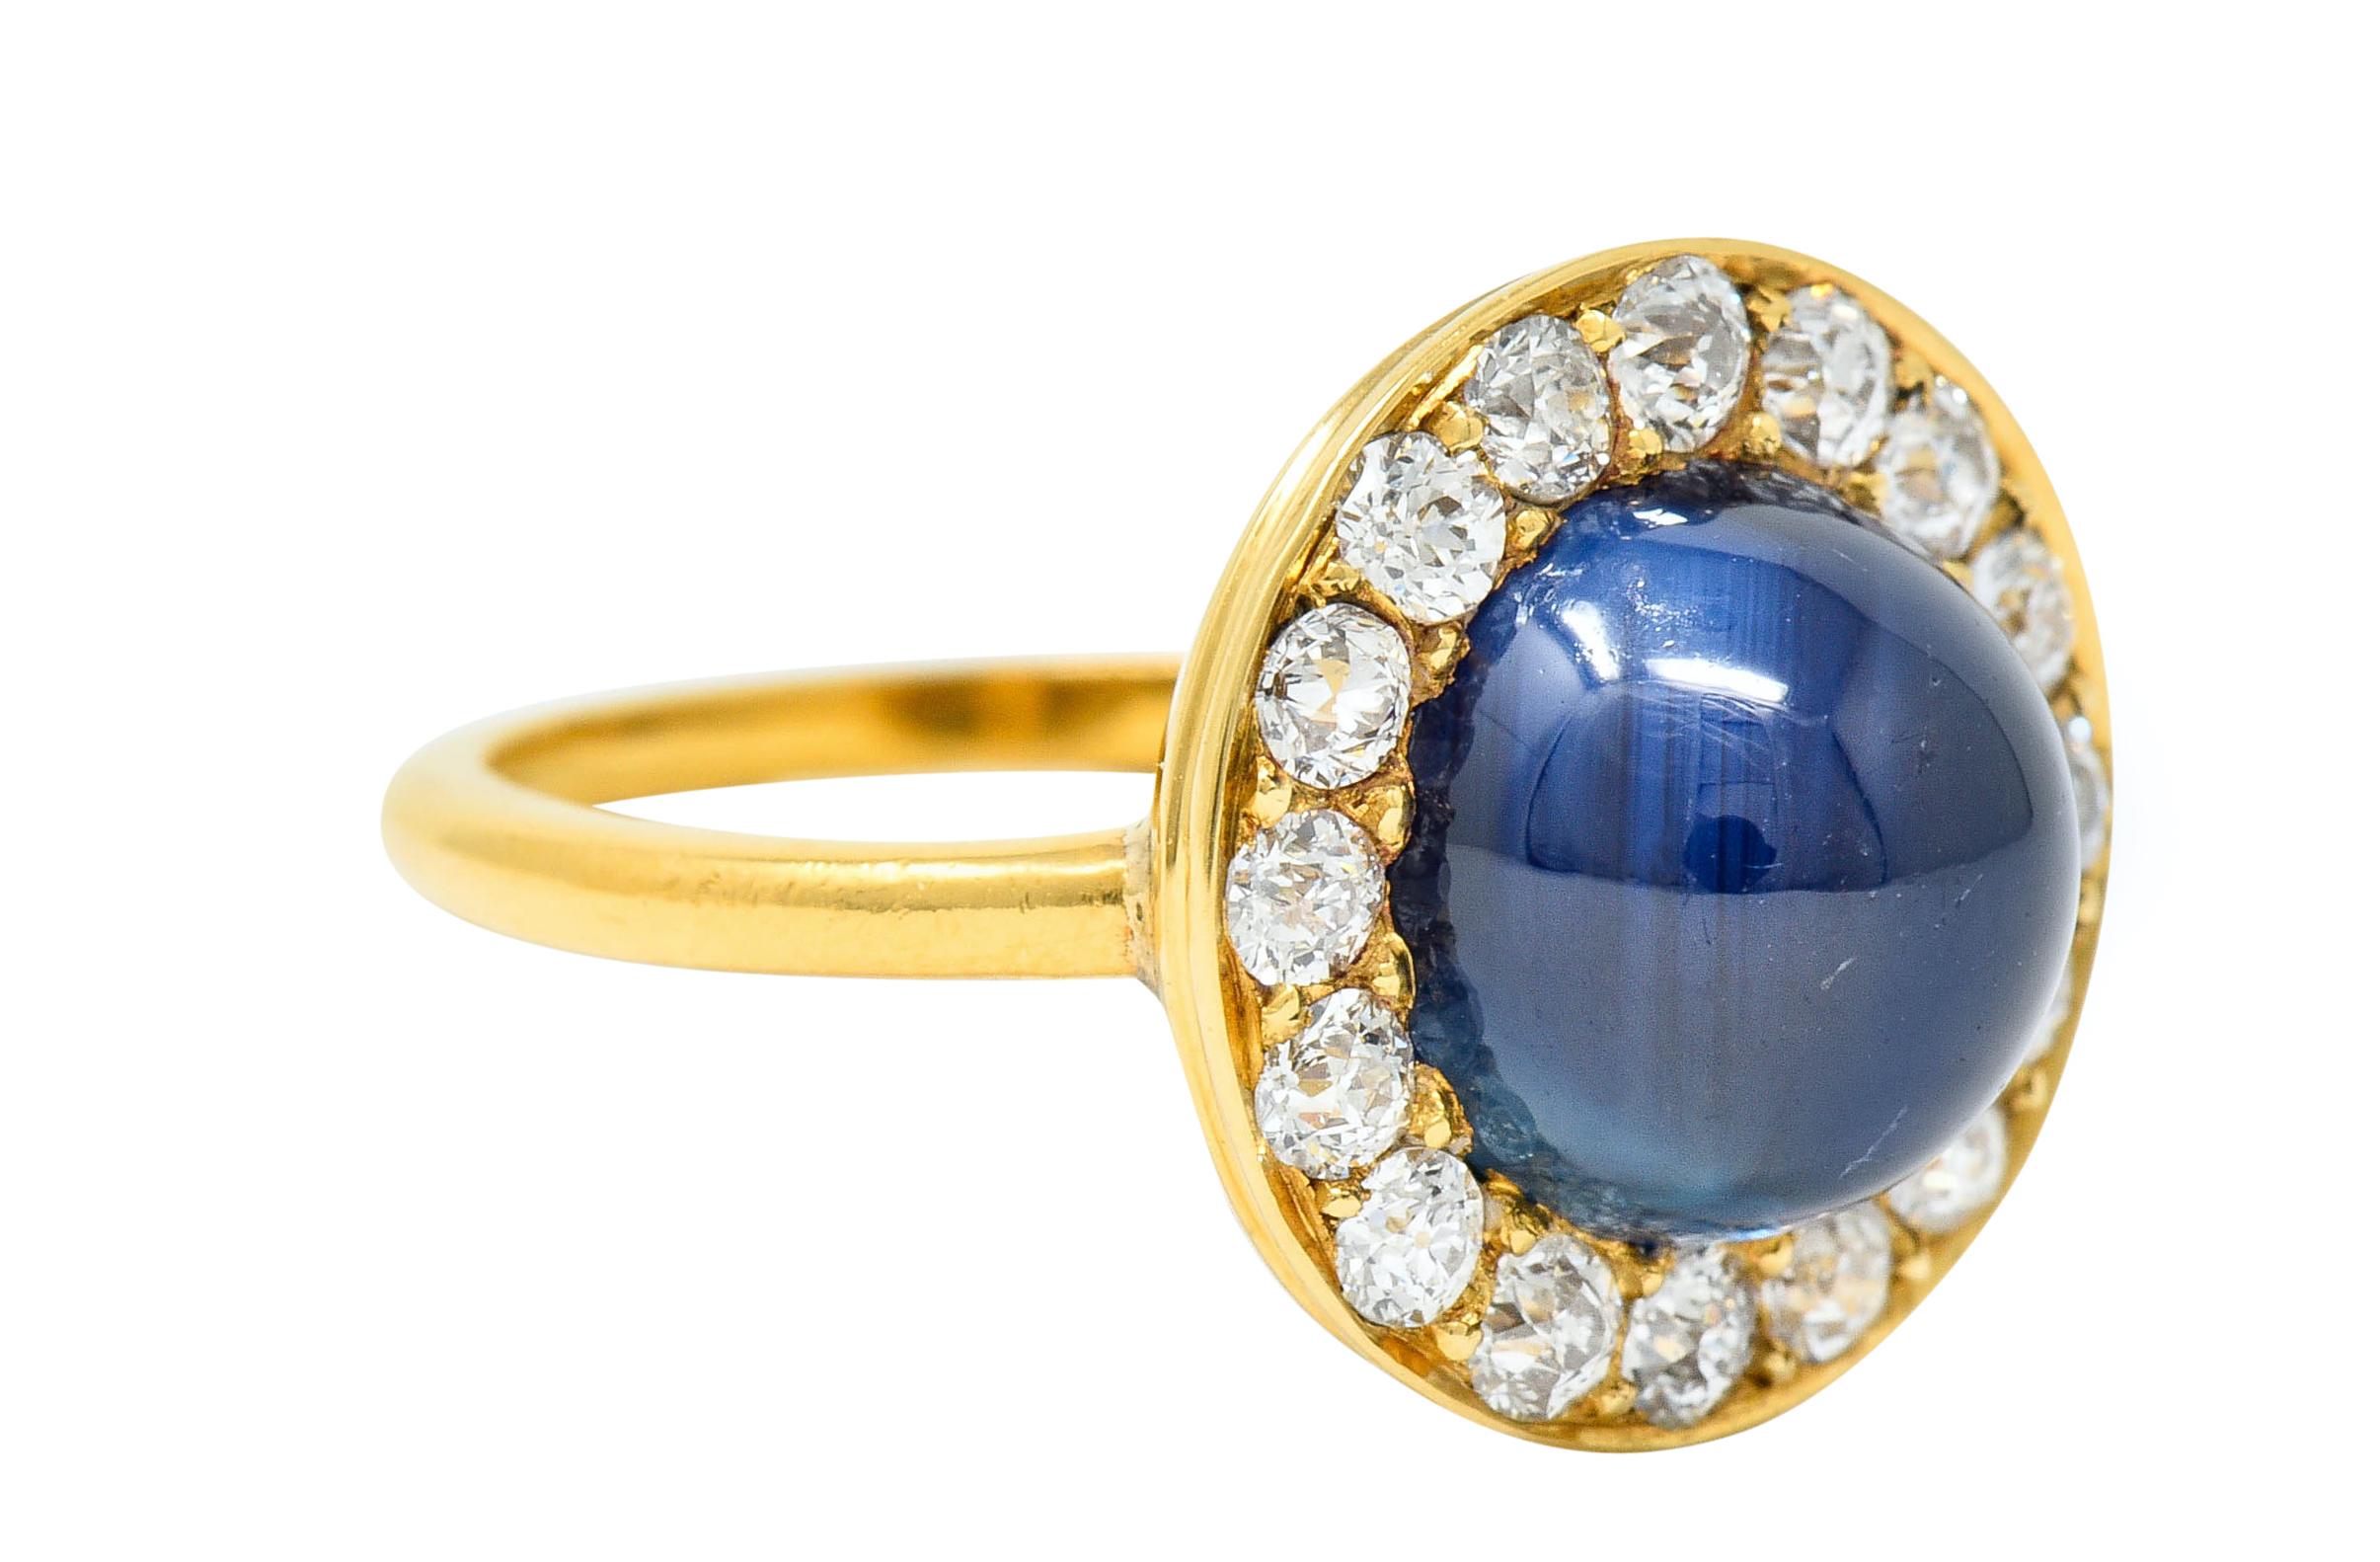 Circular cluster ring centers a round and highly domed sapphire cabochon weighing approximately 5.13 carats

Translucent dark blue in color with no indications of heat; Australian in origin

Surrounded by a halo of old European cut